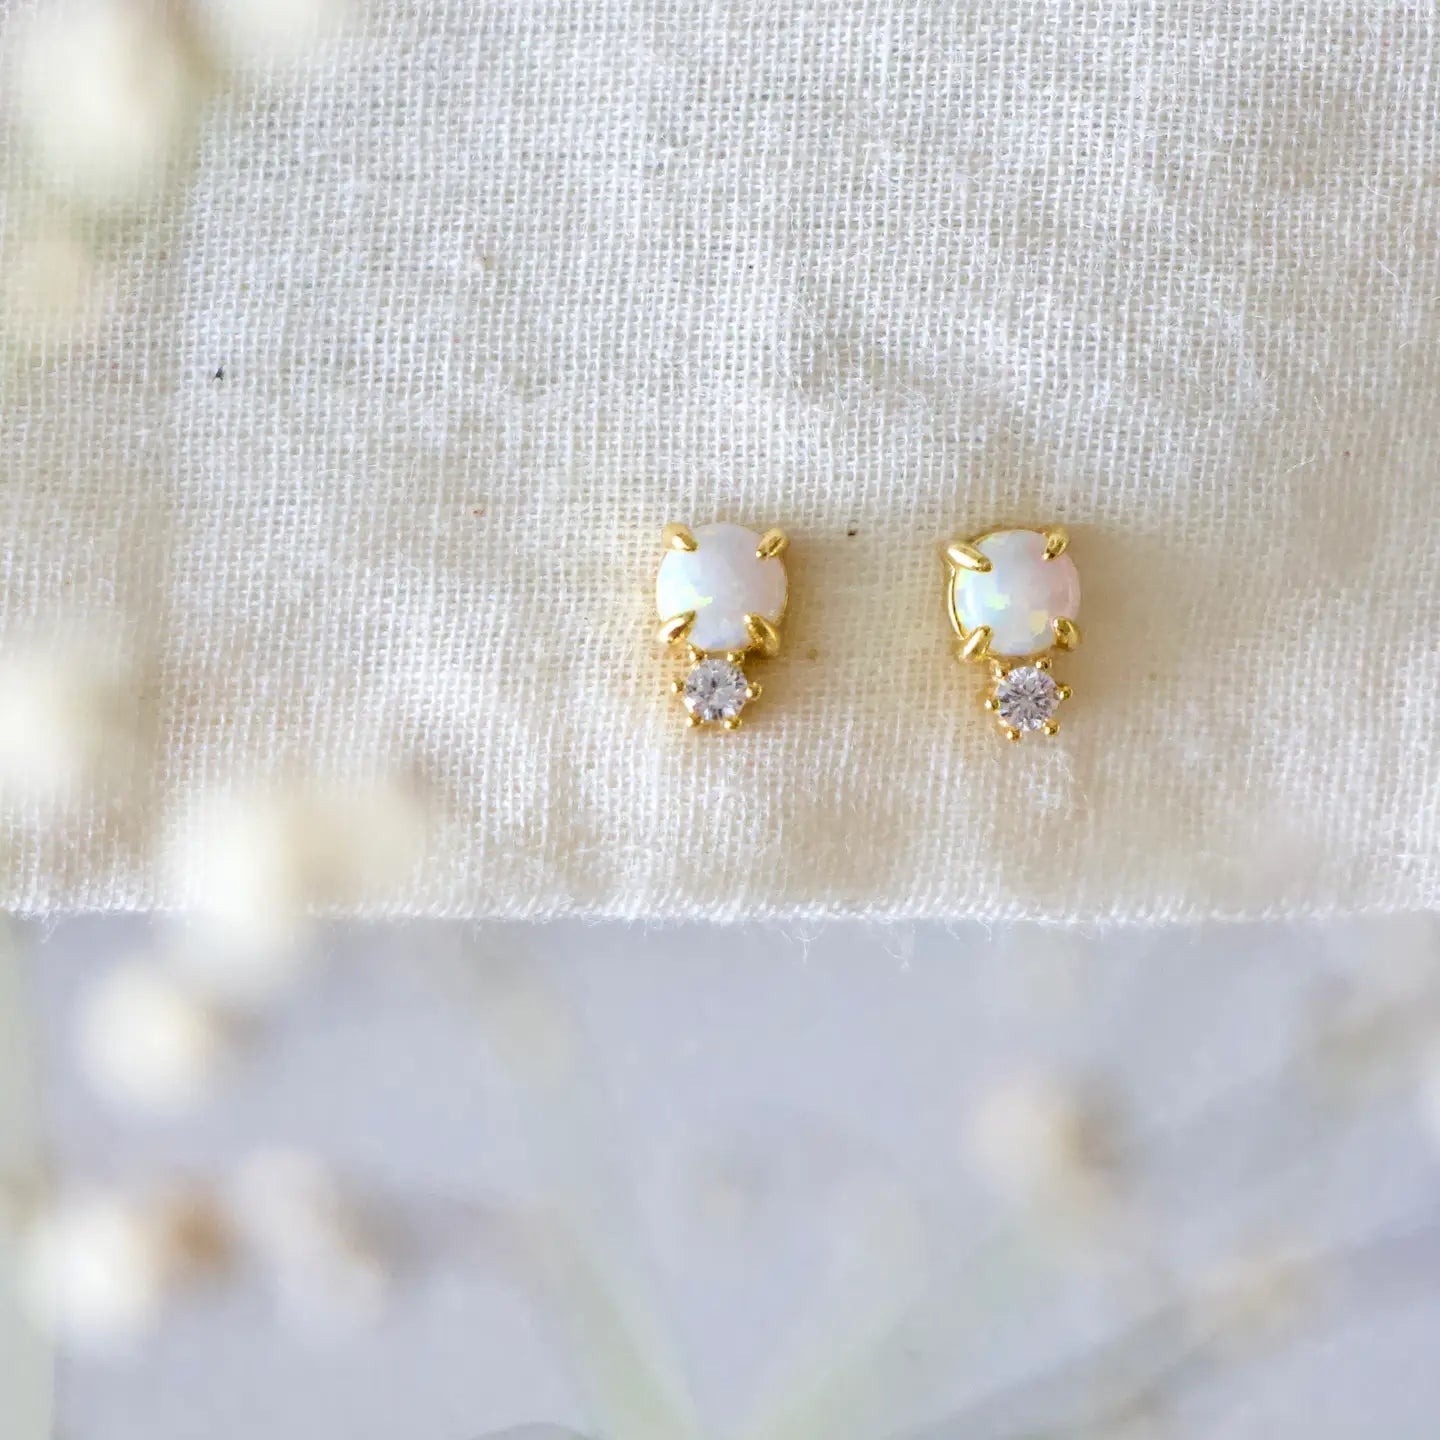 The Hypoallergenic Opal and CZ Earrings by Mesa Blue